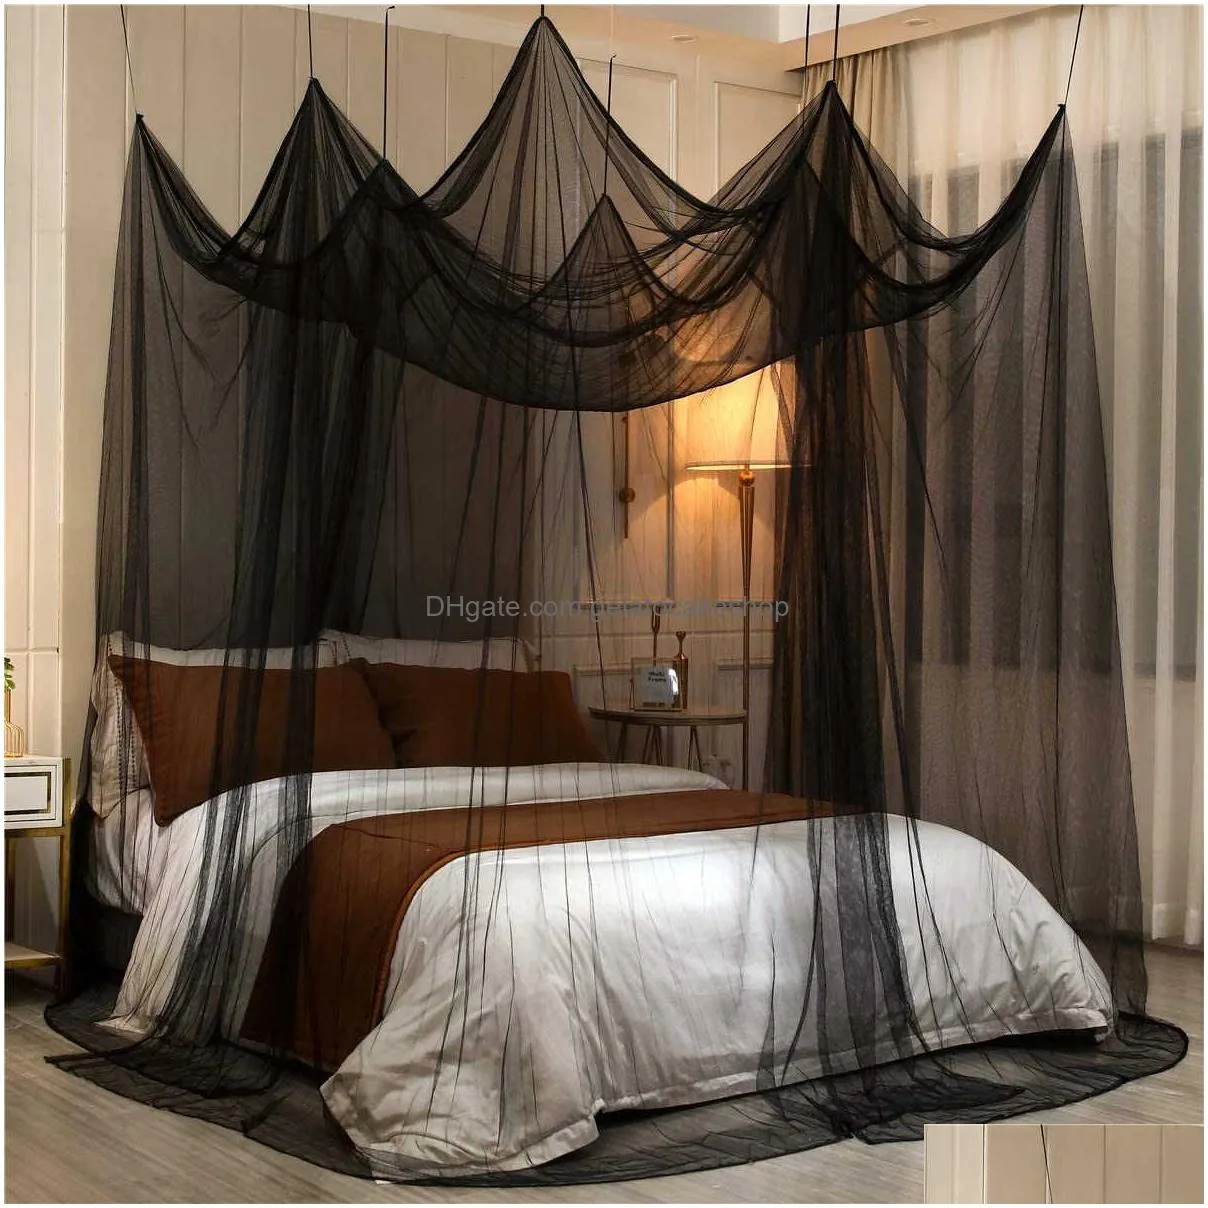  8 corner post canopy bed curtains elegant camping tent mosquito net for bed canopy screen netting full/queen/king